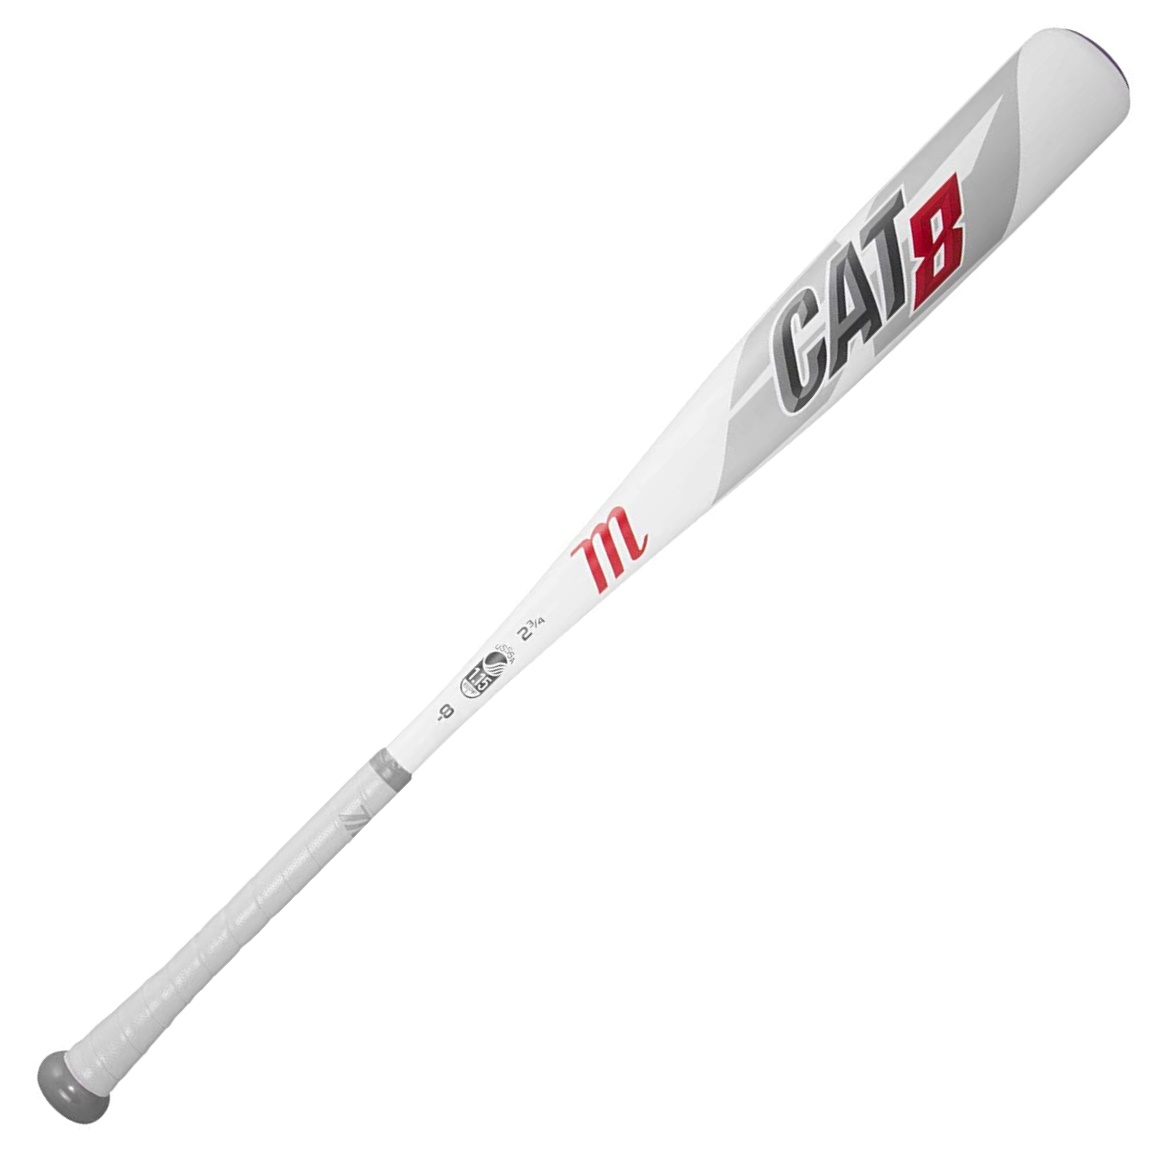 marucci-cat-8-8-baseball-bat-32-inch-24-oz MSBC88-3224 Marucci  Consistency and craftsmanship Commitment to quality and understanding of players Designed